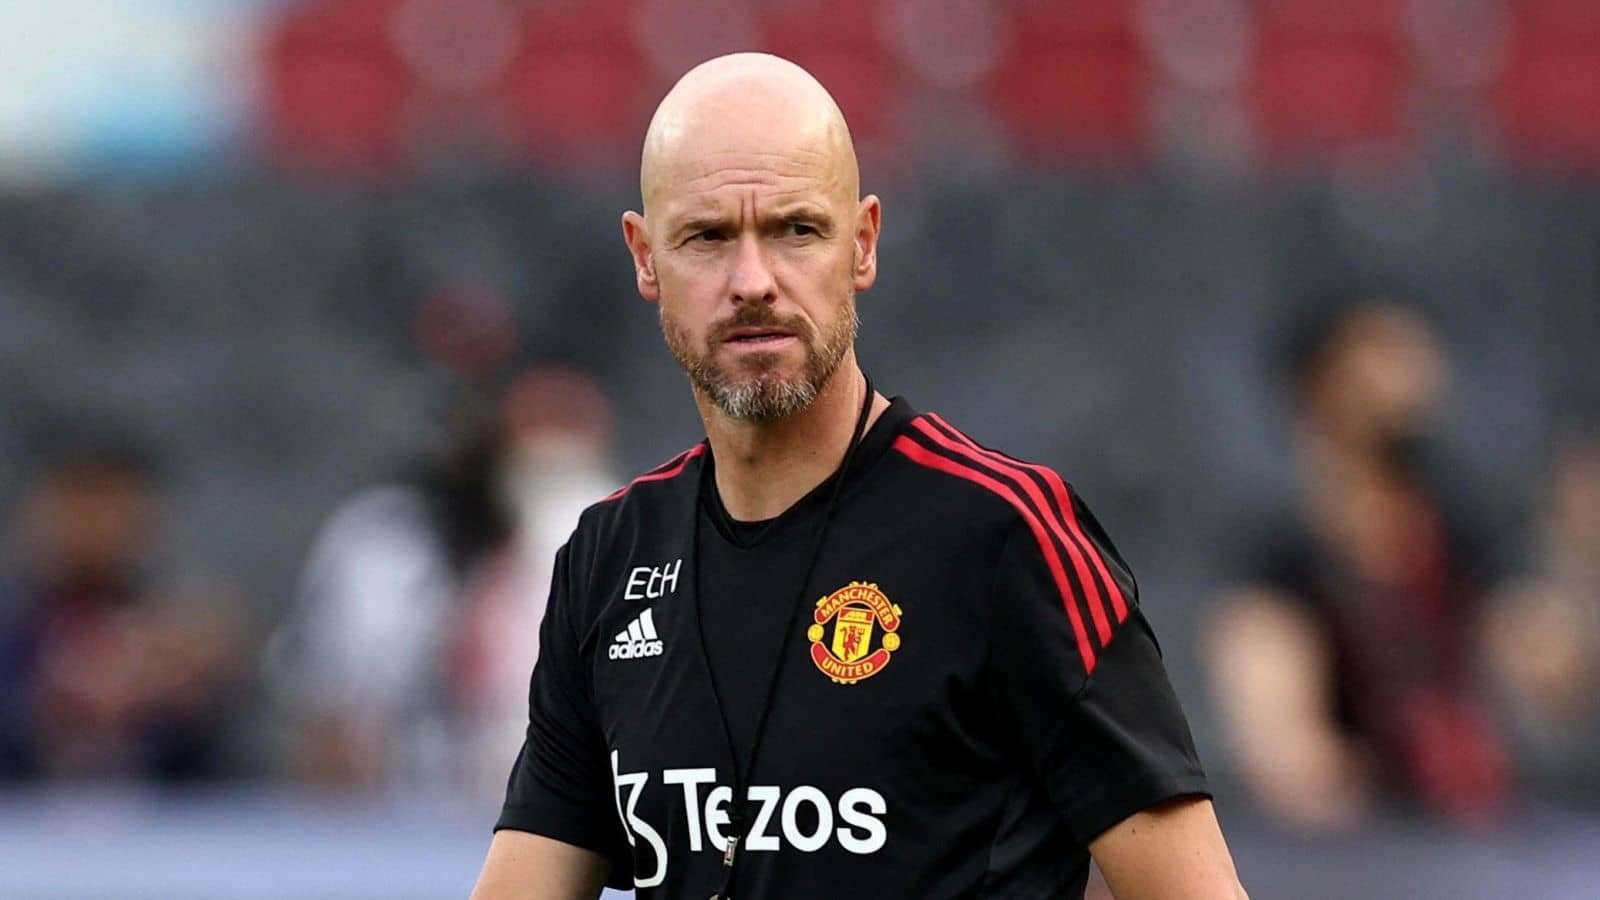 Erik ten Hag insists his Man United side are excited by the challenge of facing Man City - Bóng Đá